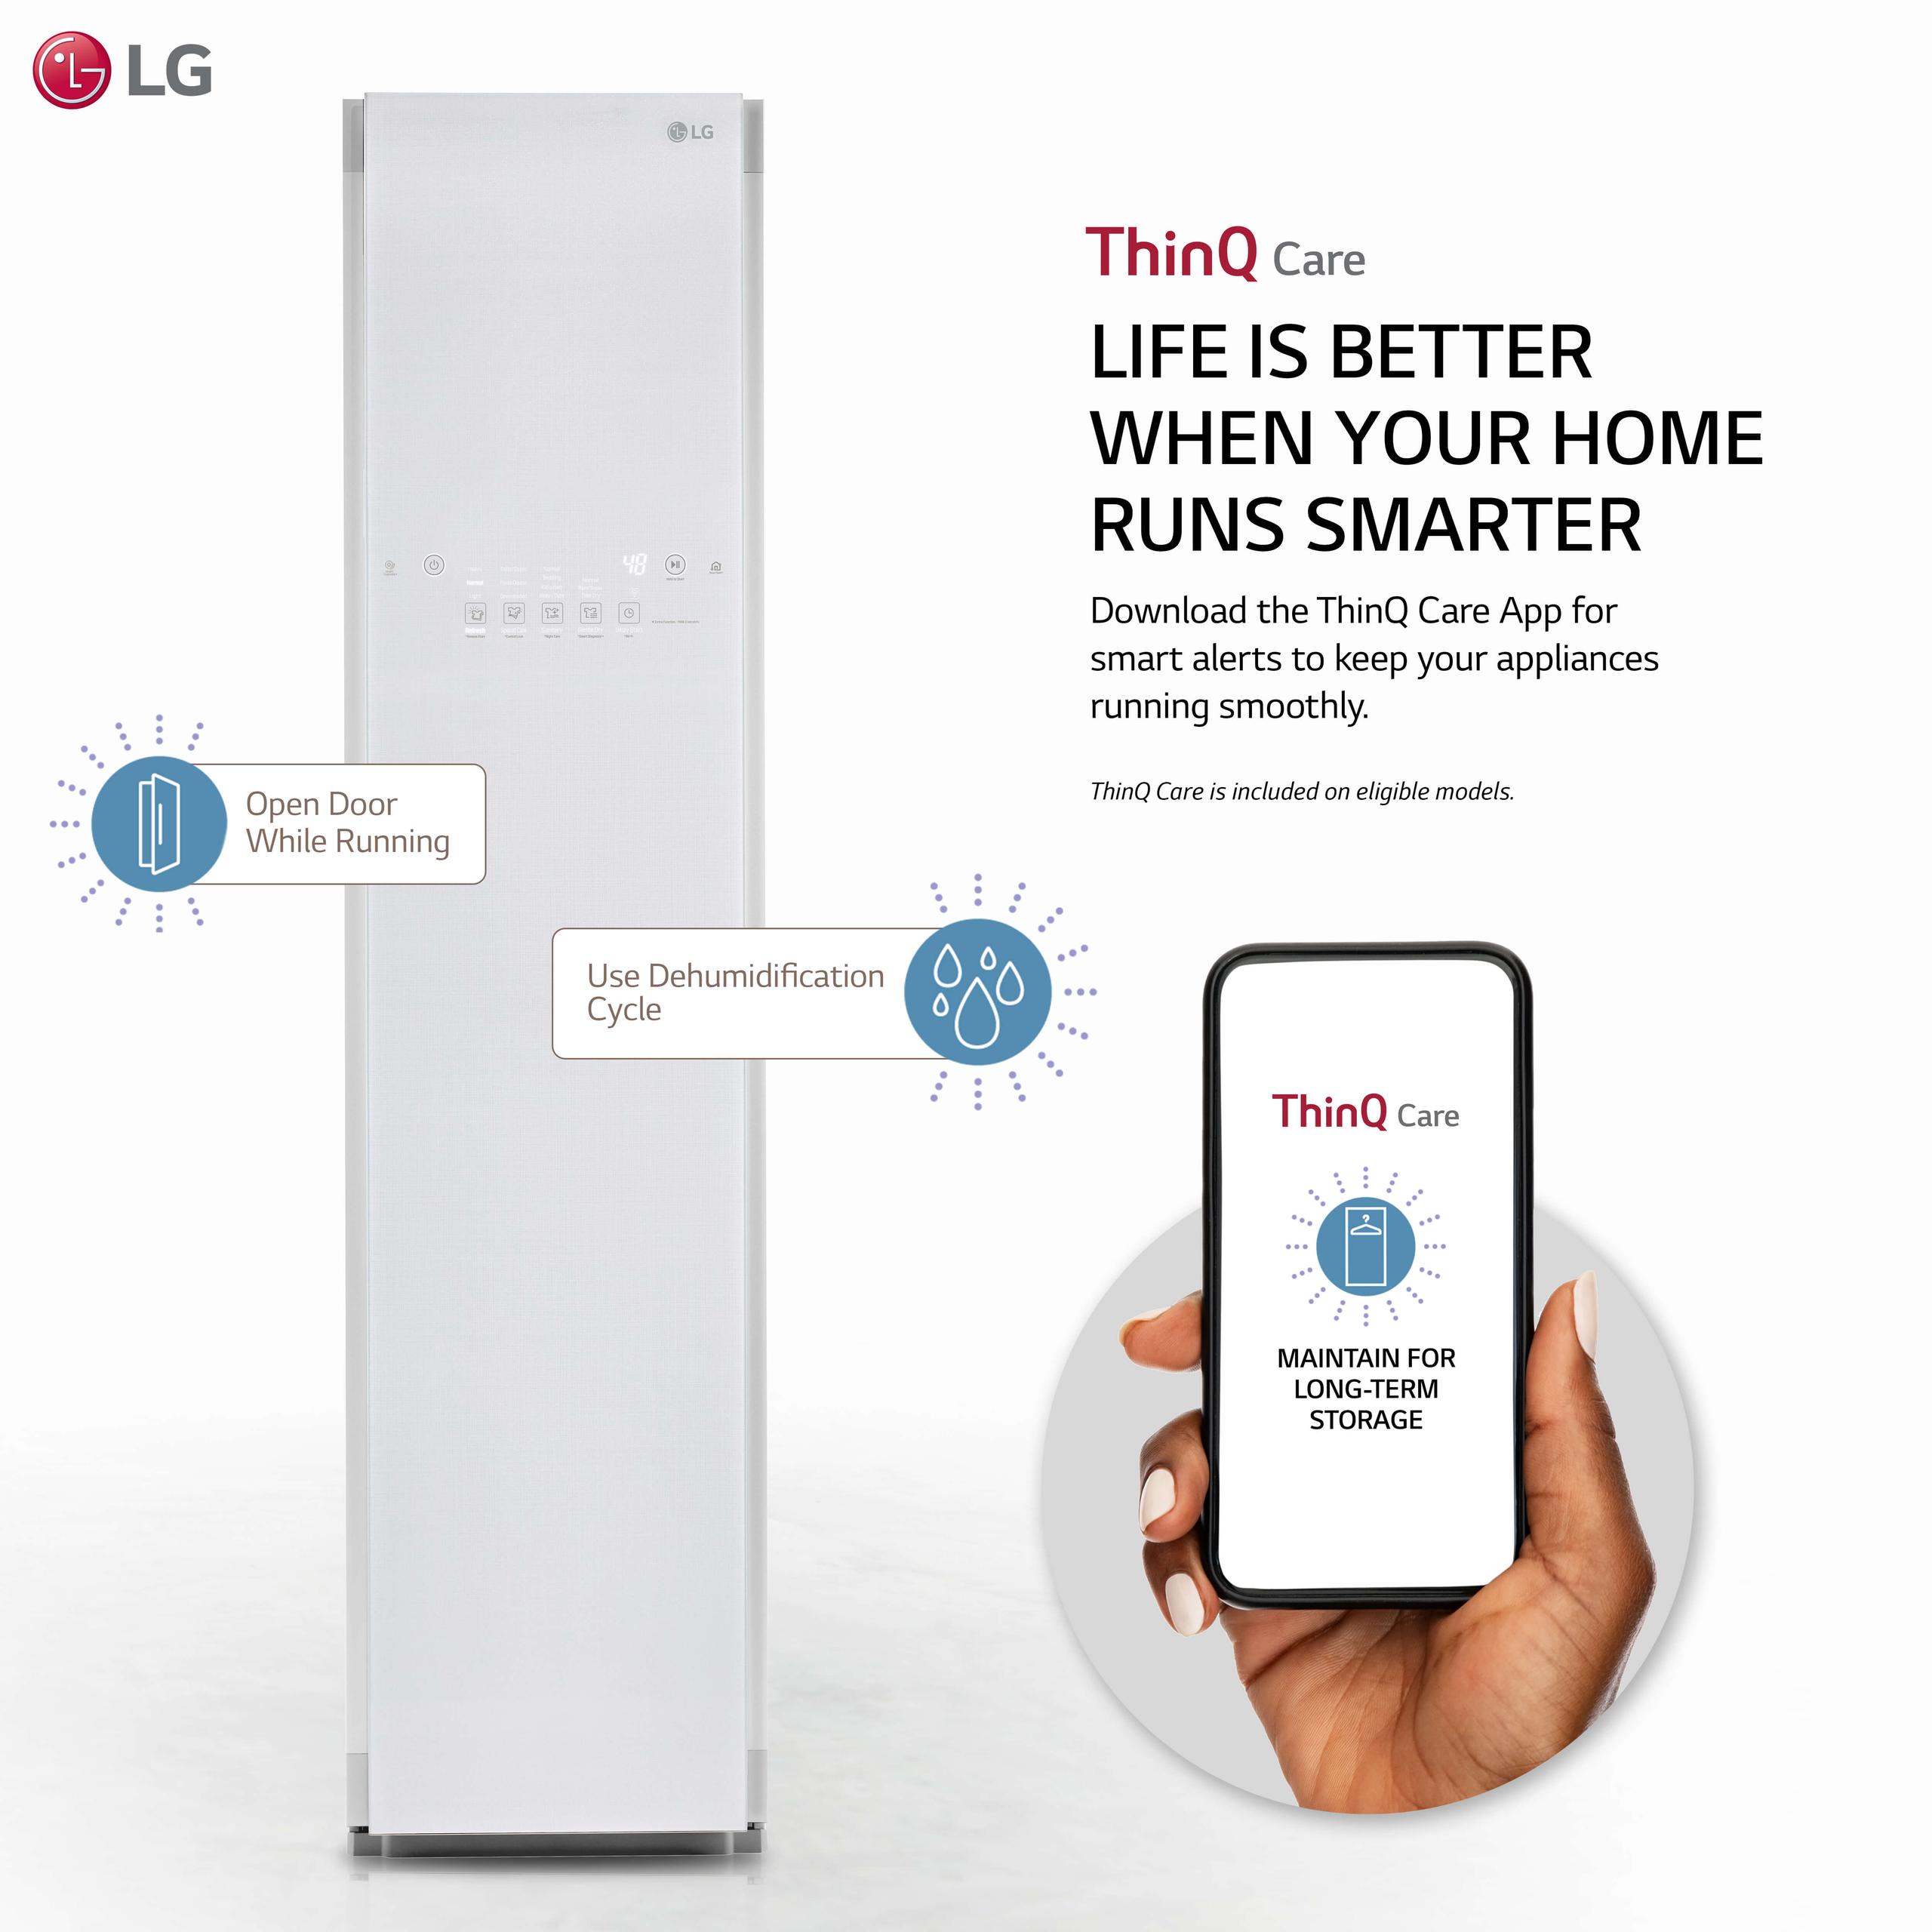 LG Styler Steam Closet with TrueSteam Technology and Exclusive Moving  Hangers